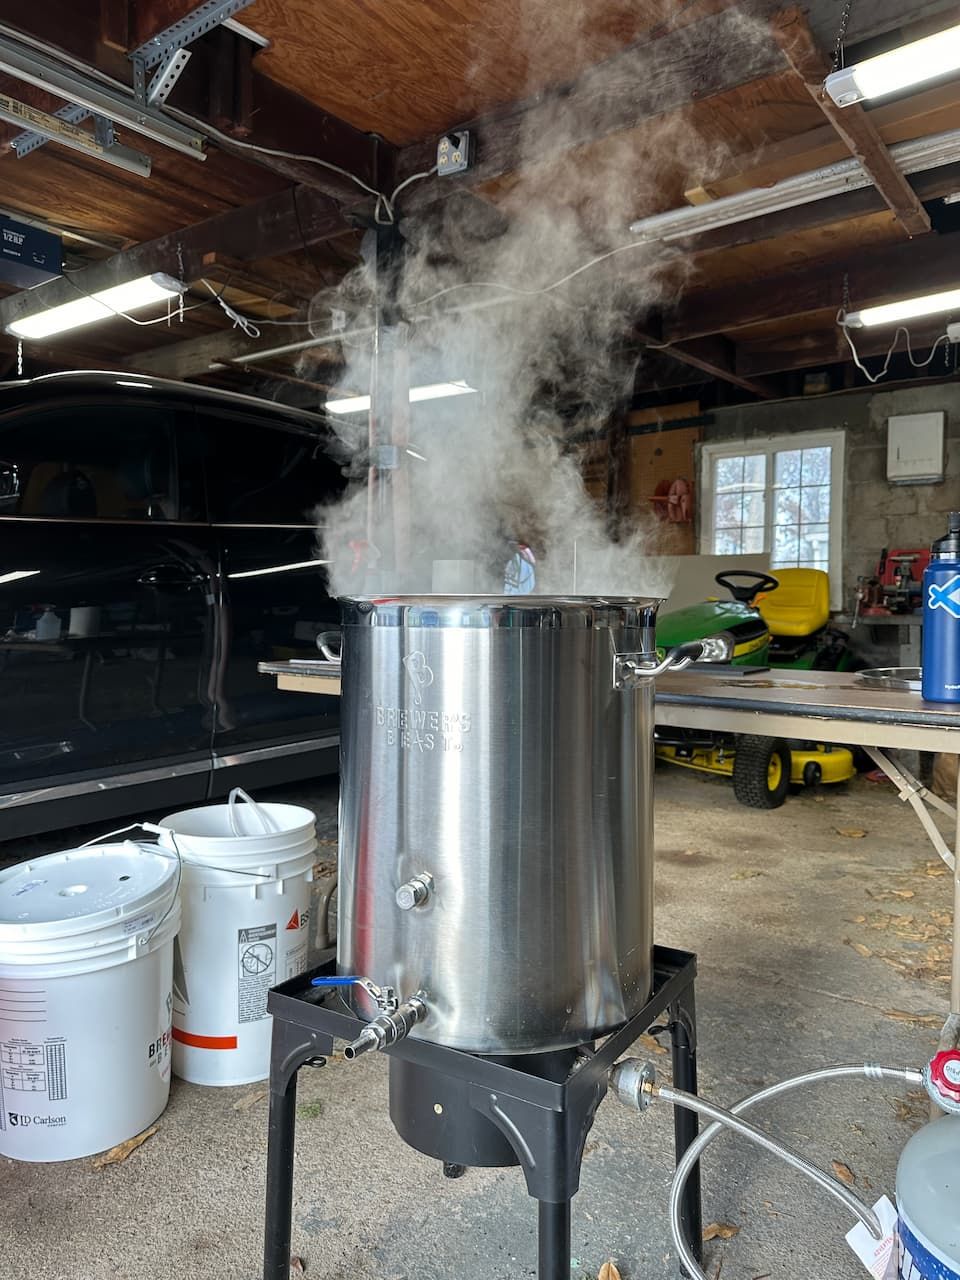 My large pot boiling the wort with steam coming up out of it